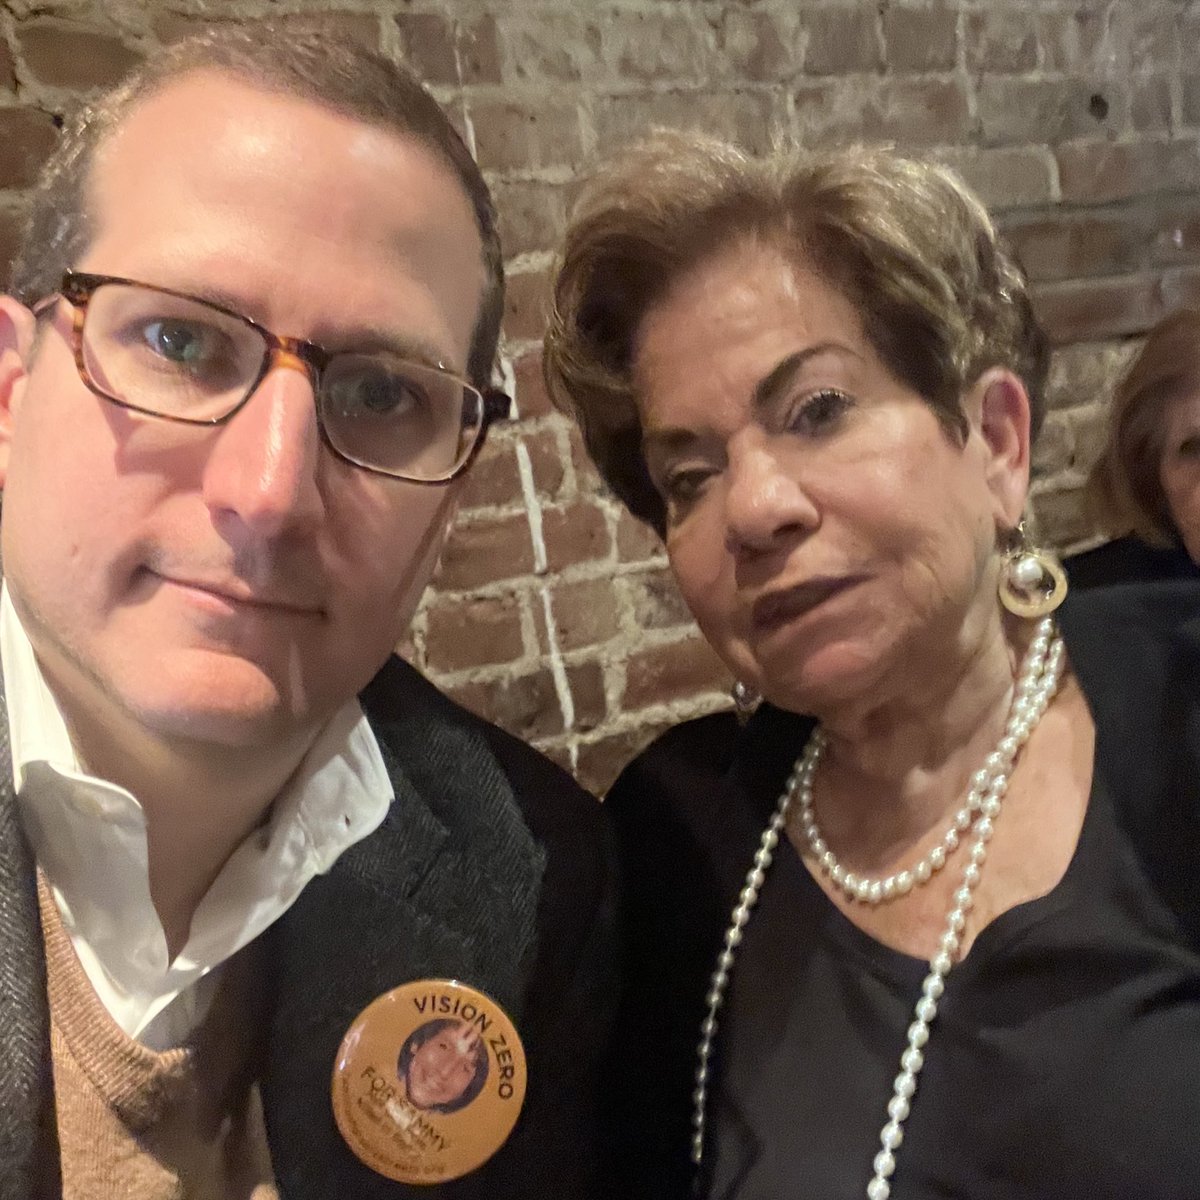 Together with Joan Dean, grandmother of Sammy Eckstein, for whom Sammy’s Law is named. Building on the leadership of @LindaBRosenthal and @bradhoylman, I was proud to play a small role in its inclusion in @GovKathyHochul’s budget proposal, and very much hope the legislature…